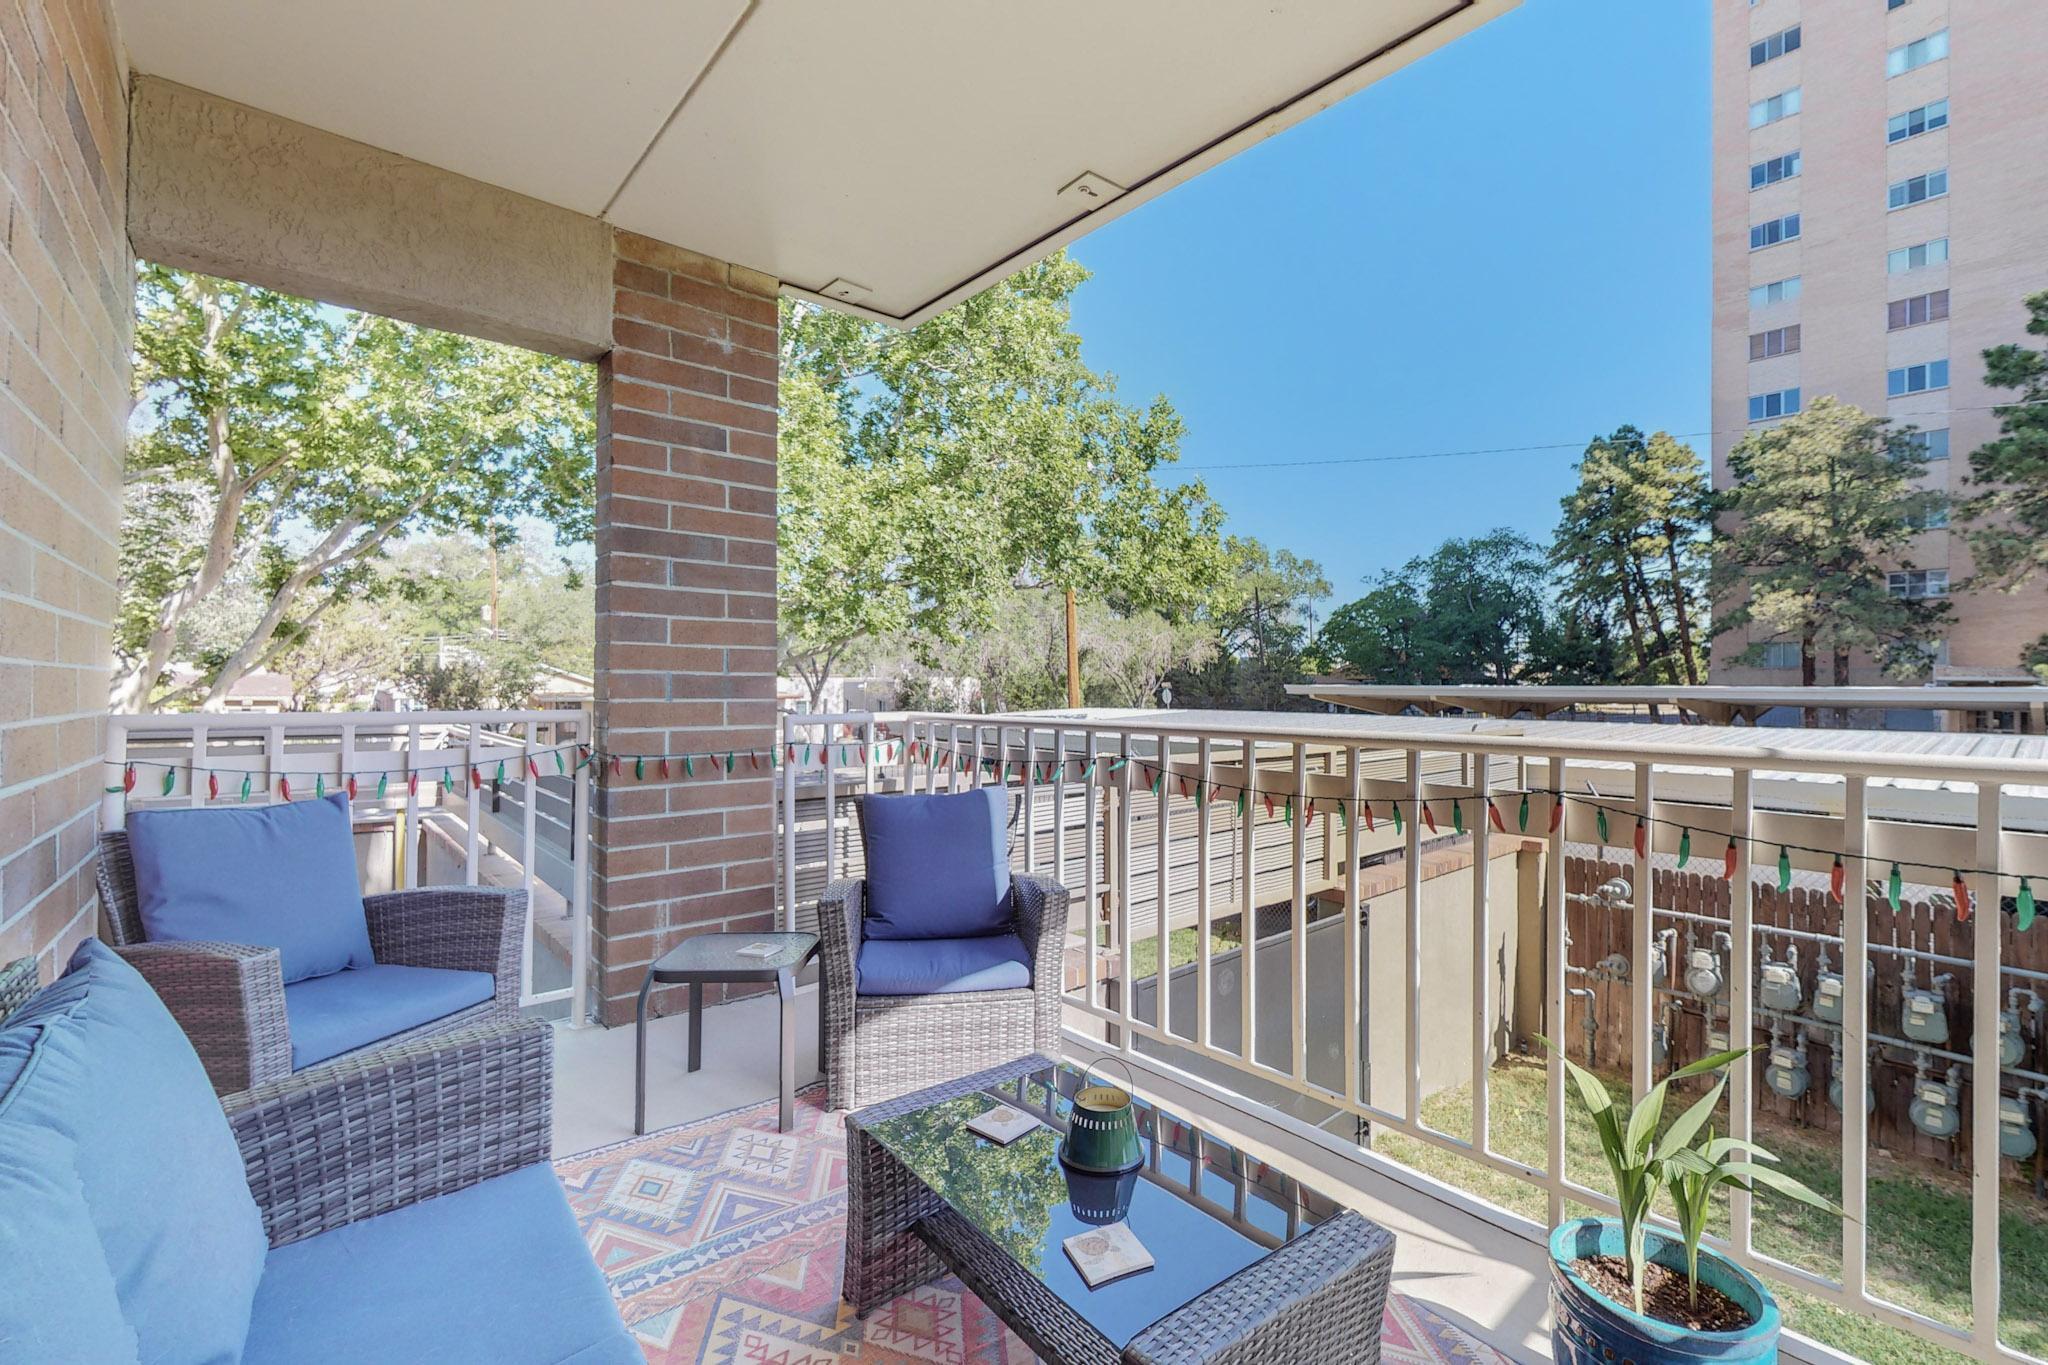 Cozy, Fully Remodeled 2 BR Condo w/ Fireplace & Balcony w/peek a boo mountain view.  Close proximity to downtown growers market, zoo, restaurants, old town and more! This condo was fully renovated in 2023: tankless Water heater, HVAC dual heat/ac recently replaced. Bath/Kitchen fully remodeled. jet tub.The Seller's replaced 2 balcony doors and added 3, double pane storm doors. New Windows, New kitchen backsplash, under cabinet lighting, quartz counter tops, stacked w/d installed 2023. kitchen appliances replaced 2023. Cove ceilings, Steel door added to storage room (in garage). Insulation added. On deck is a community BBQ grill, Dog park on North side of building, fruit trees: cherry, peach, apple, pomegranate. All appliances convey, wine fridge. Has storage unit & 2 covered garage spaces